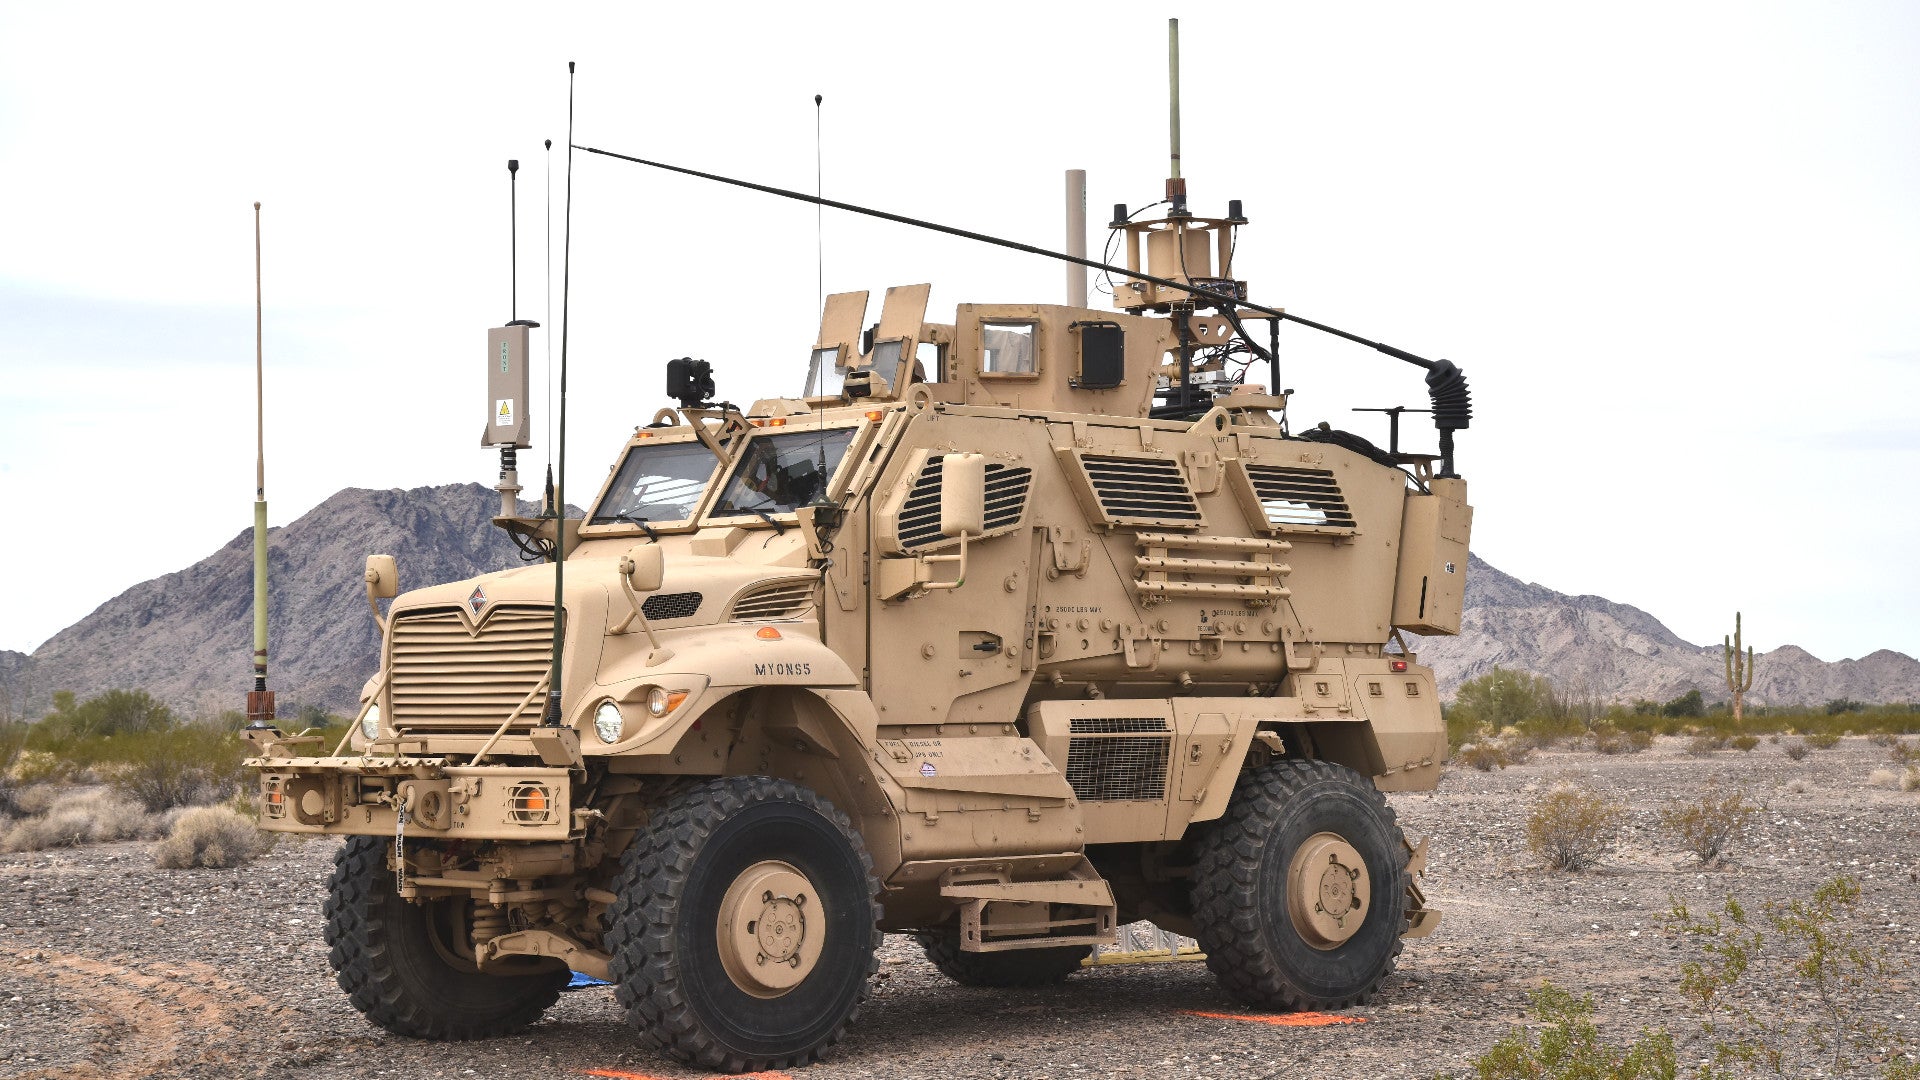 This Is The Army's New Electronic Warfare Vehicle, The First Of Its